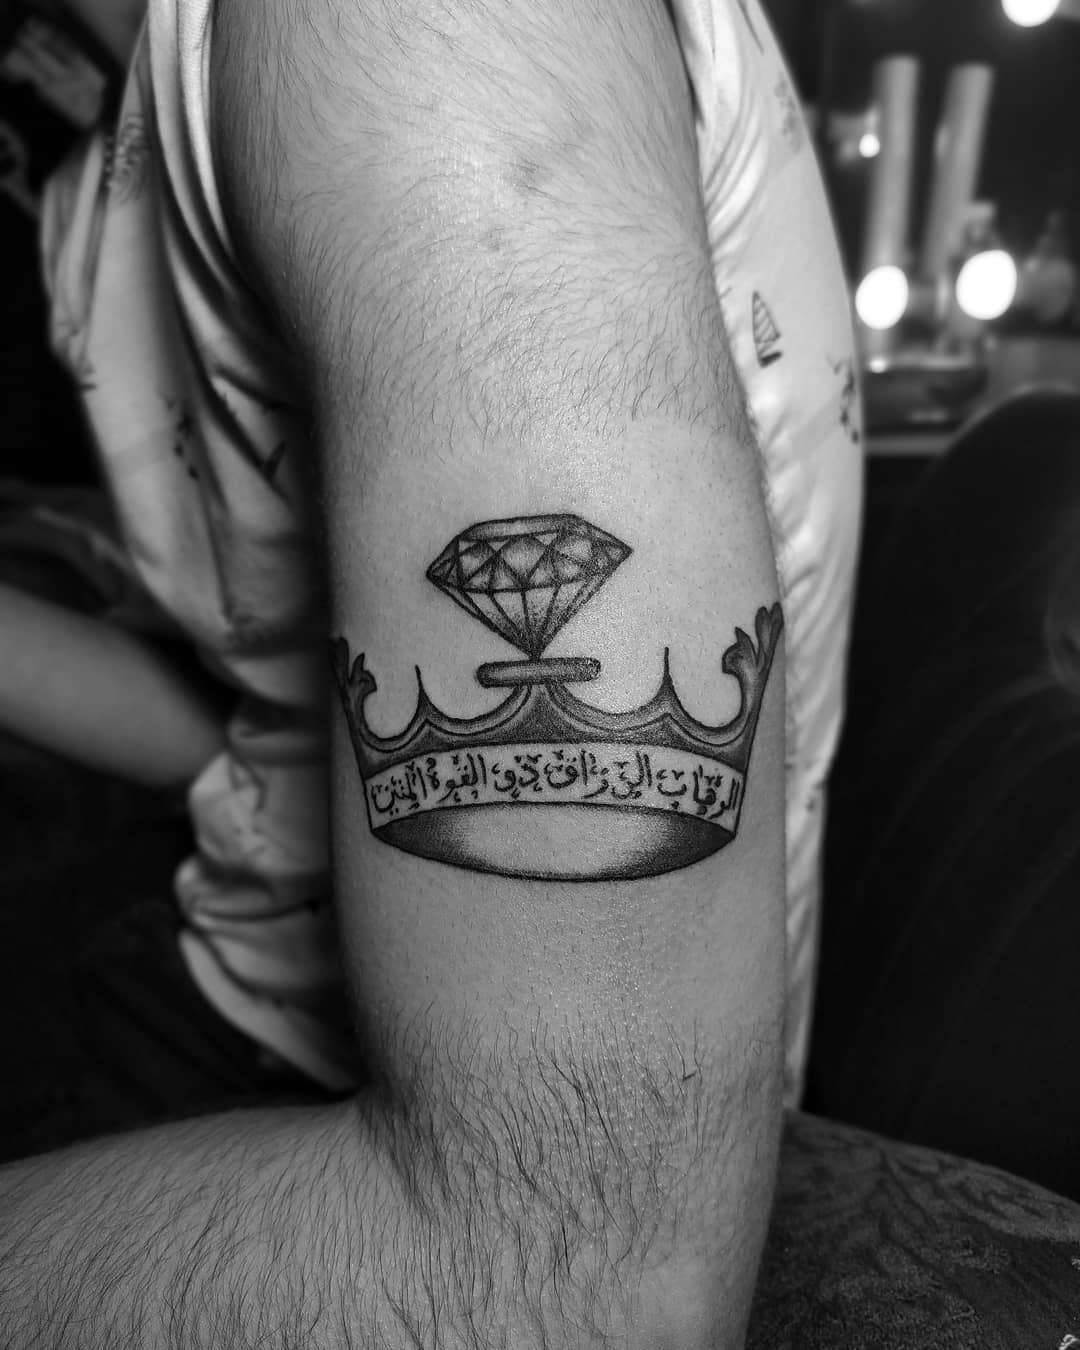 Crown tattoos have always been one of the most popular choices. You can add Arabic words below it to make it more gorgeous.